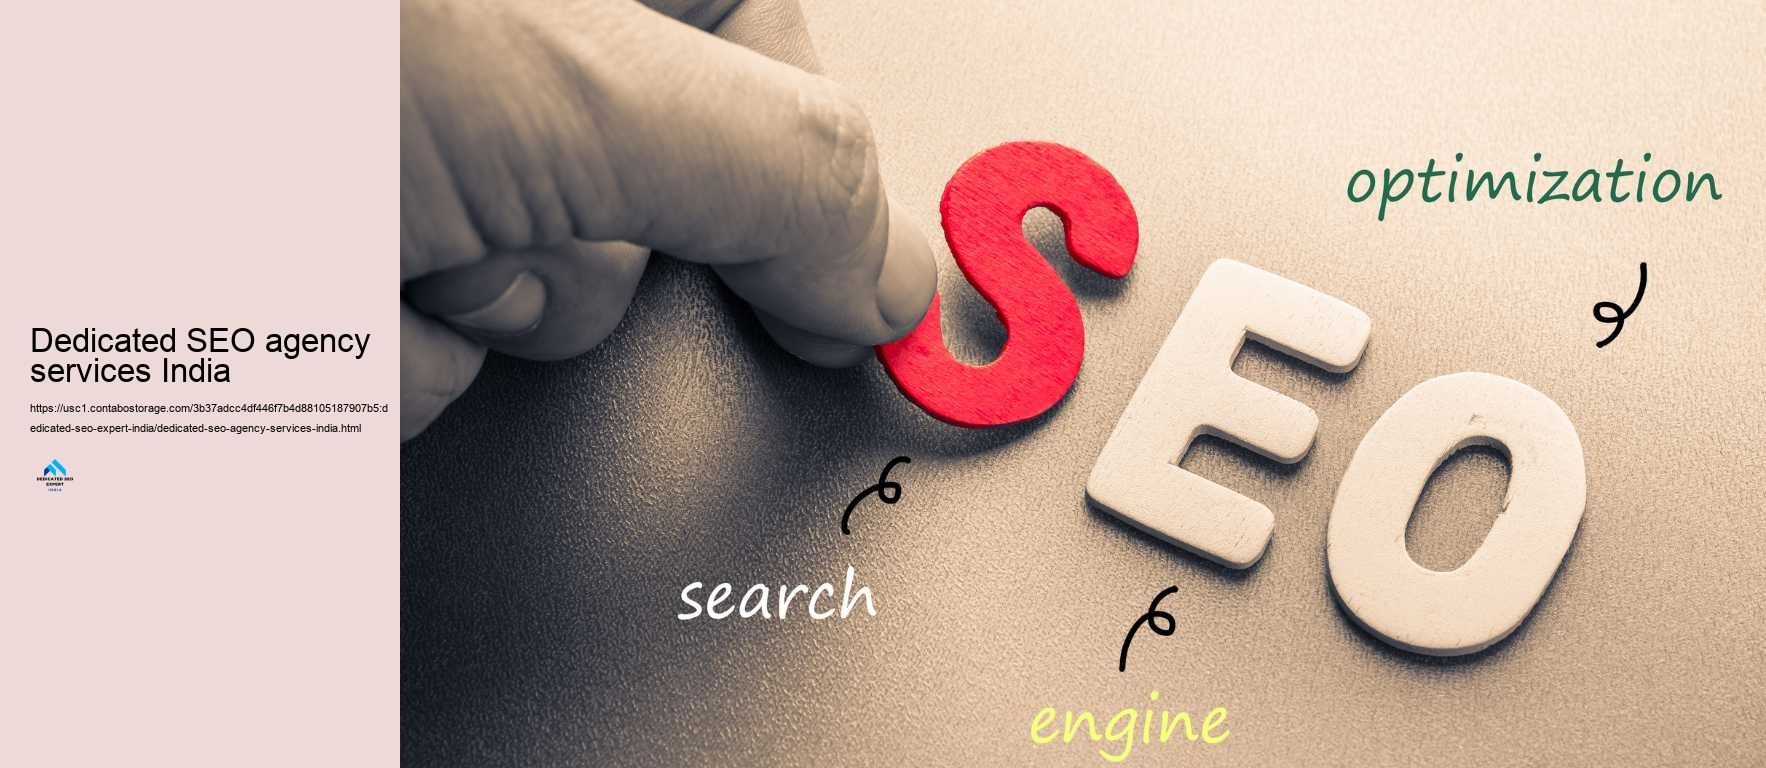 Dedicated SEO agency services India